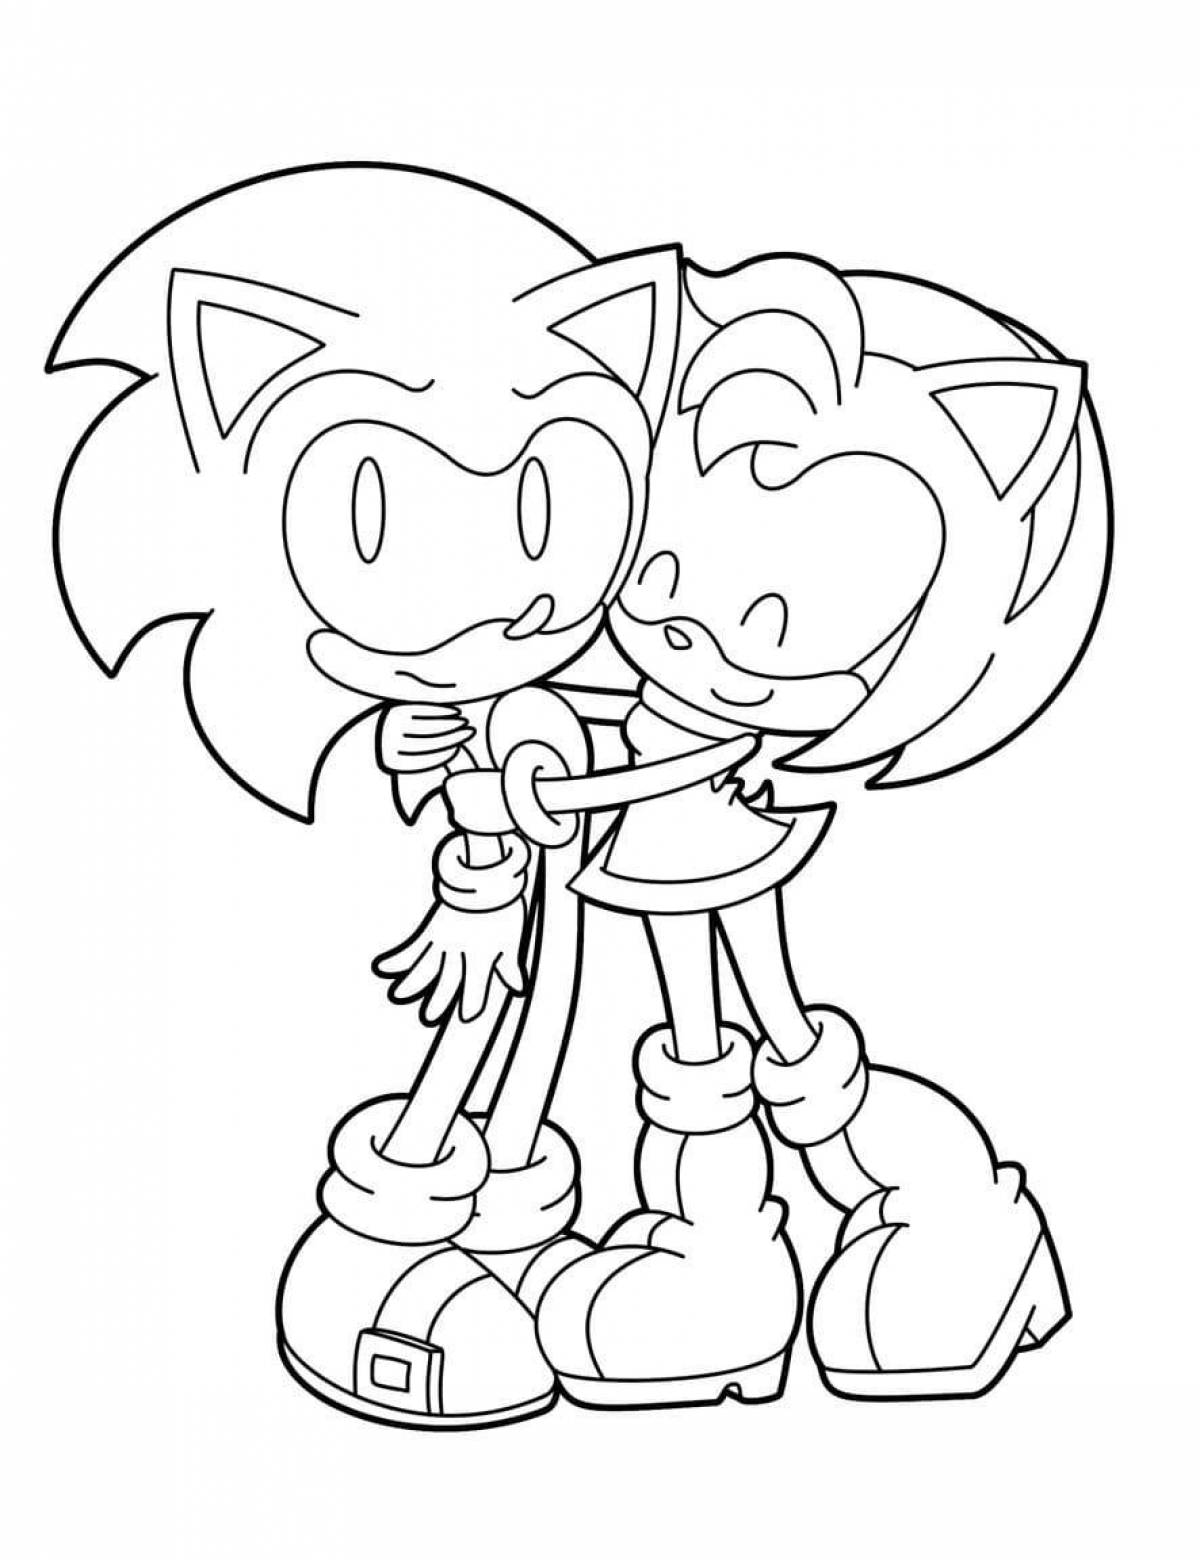 Colorful amy rose coloring page